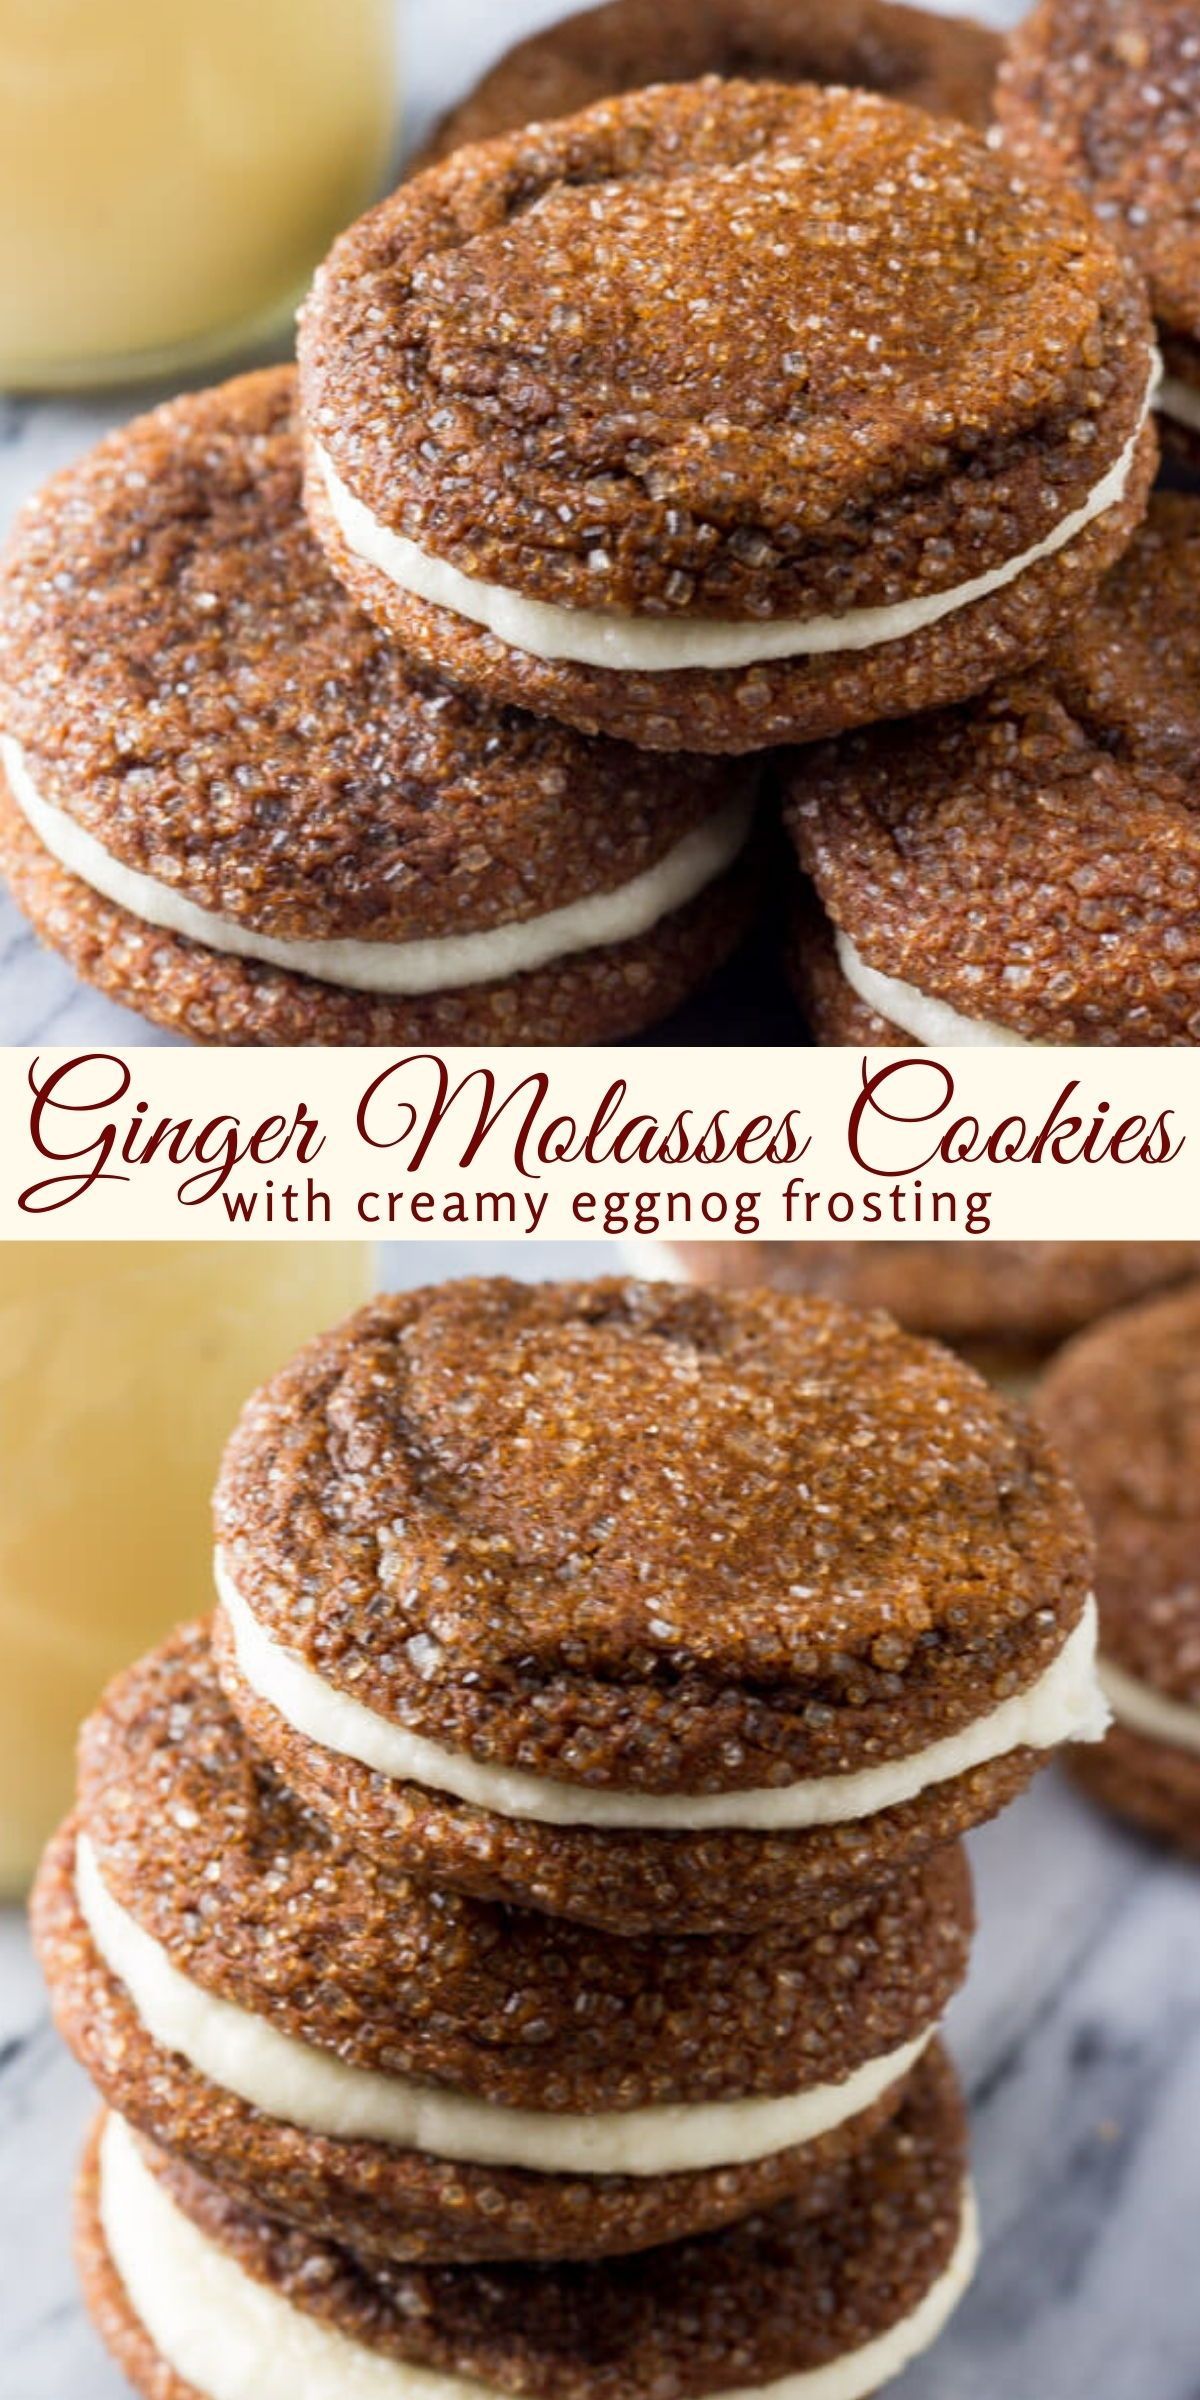 Ginger Molasses Sandwich Cookies with Eggnog Frosting HD Wallpaper